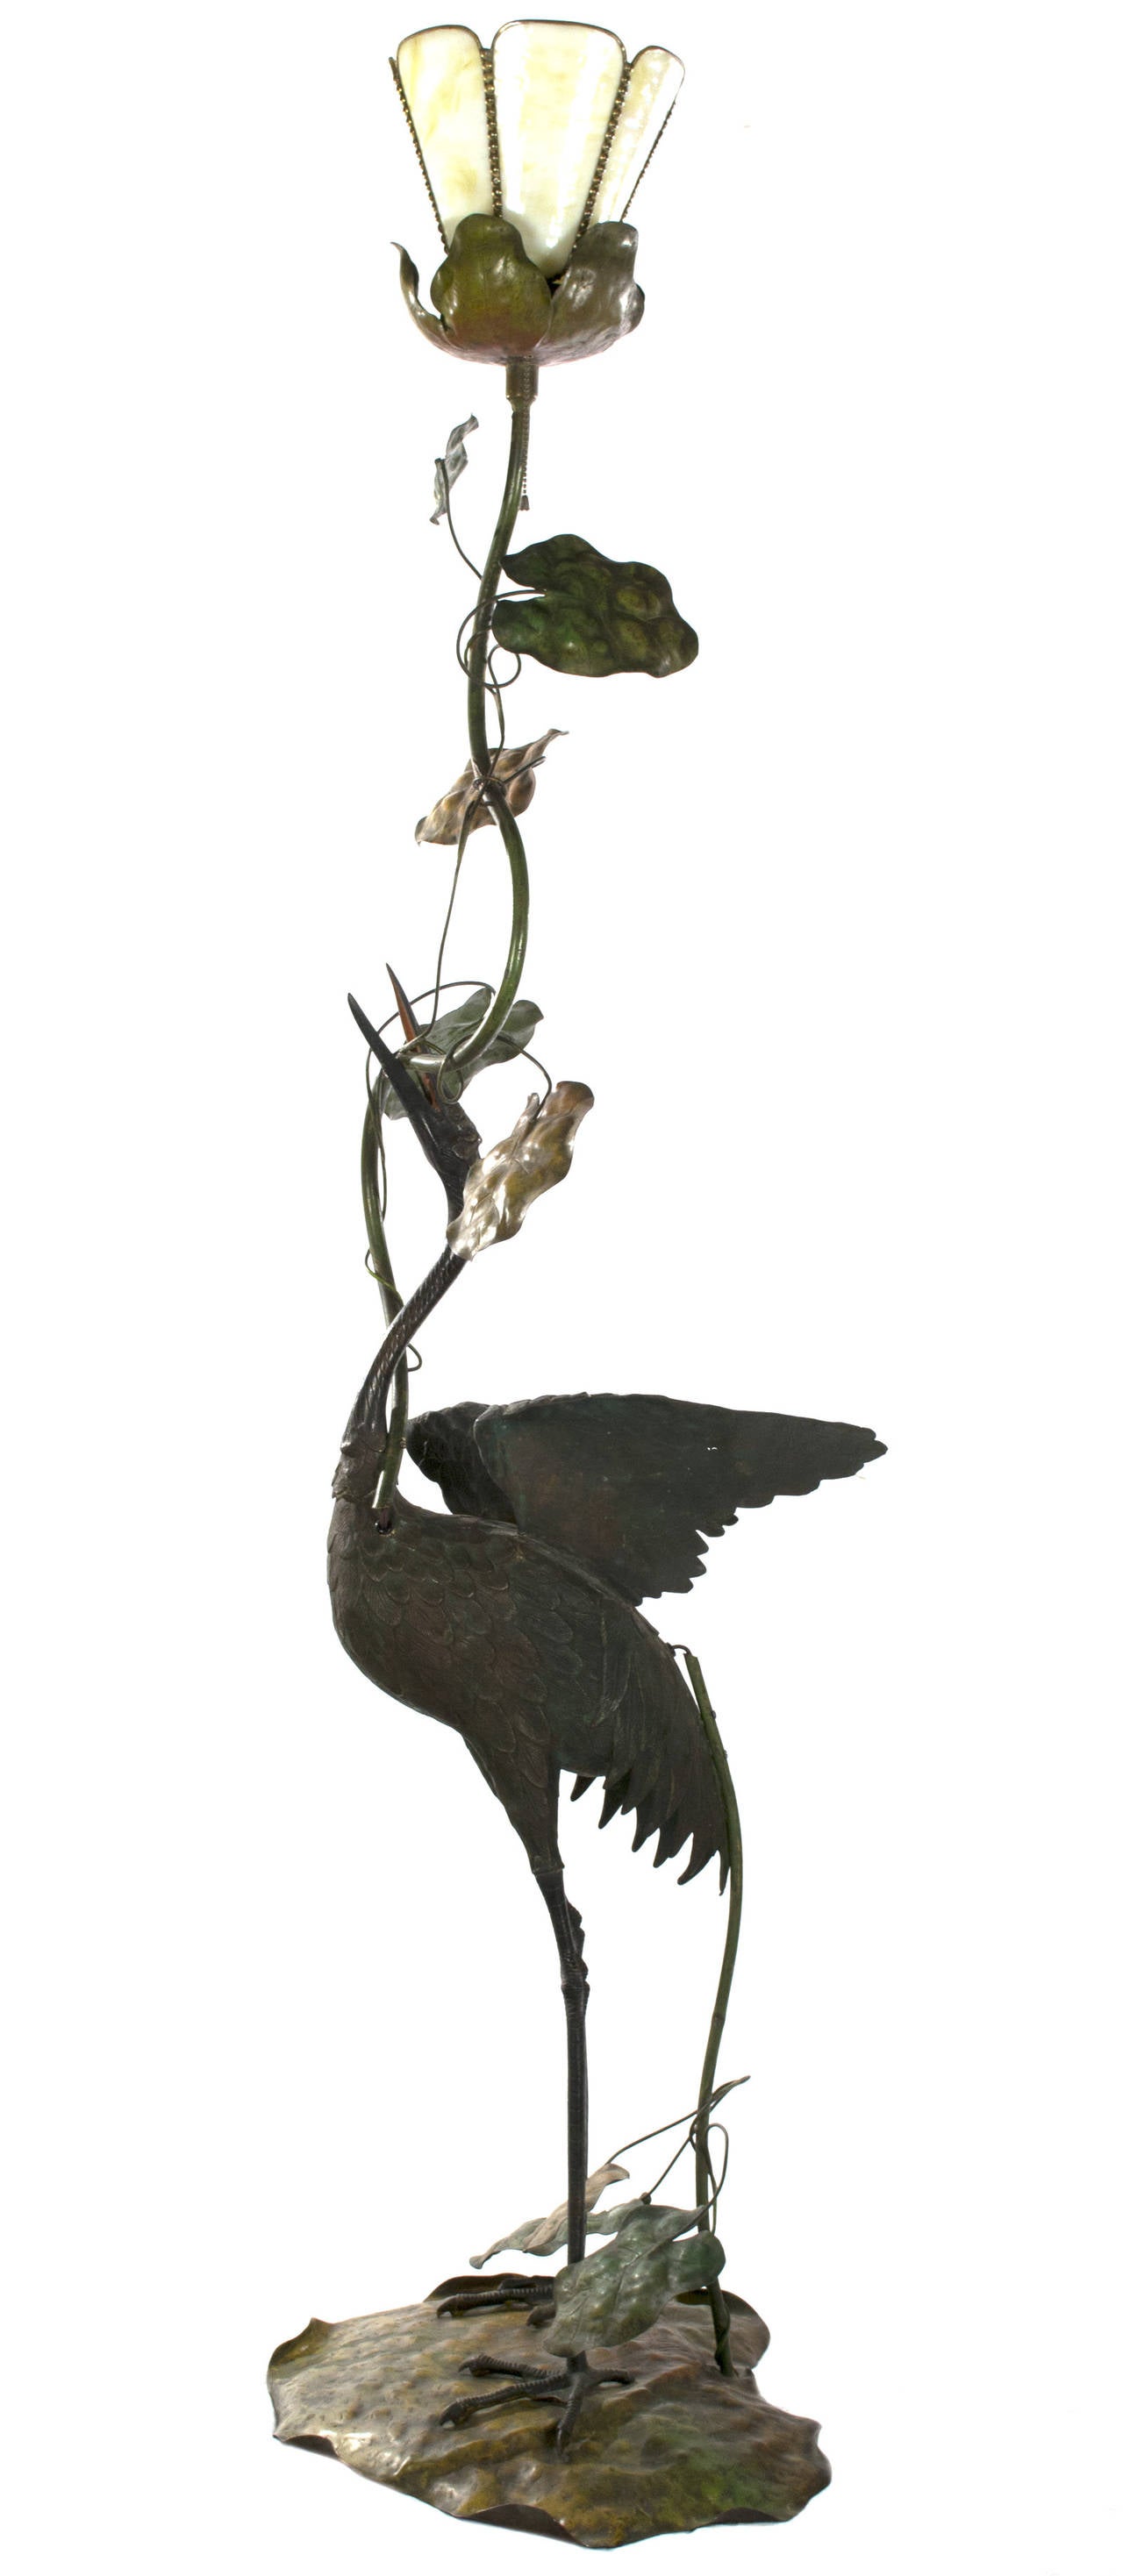 In the best tradition of Japanese depictions of nature in art, this large floor lamp depicts a heron as it gingerly stretches its wings and raises its head to the light. The sculpture, a work of beautiful observations and artistry, the heron and